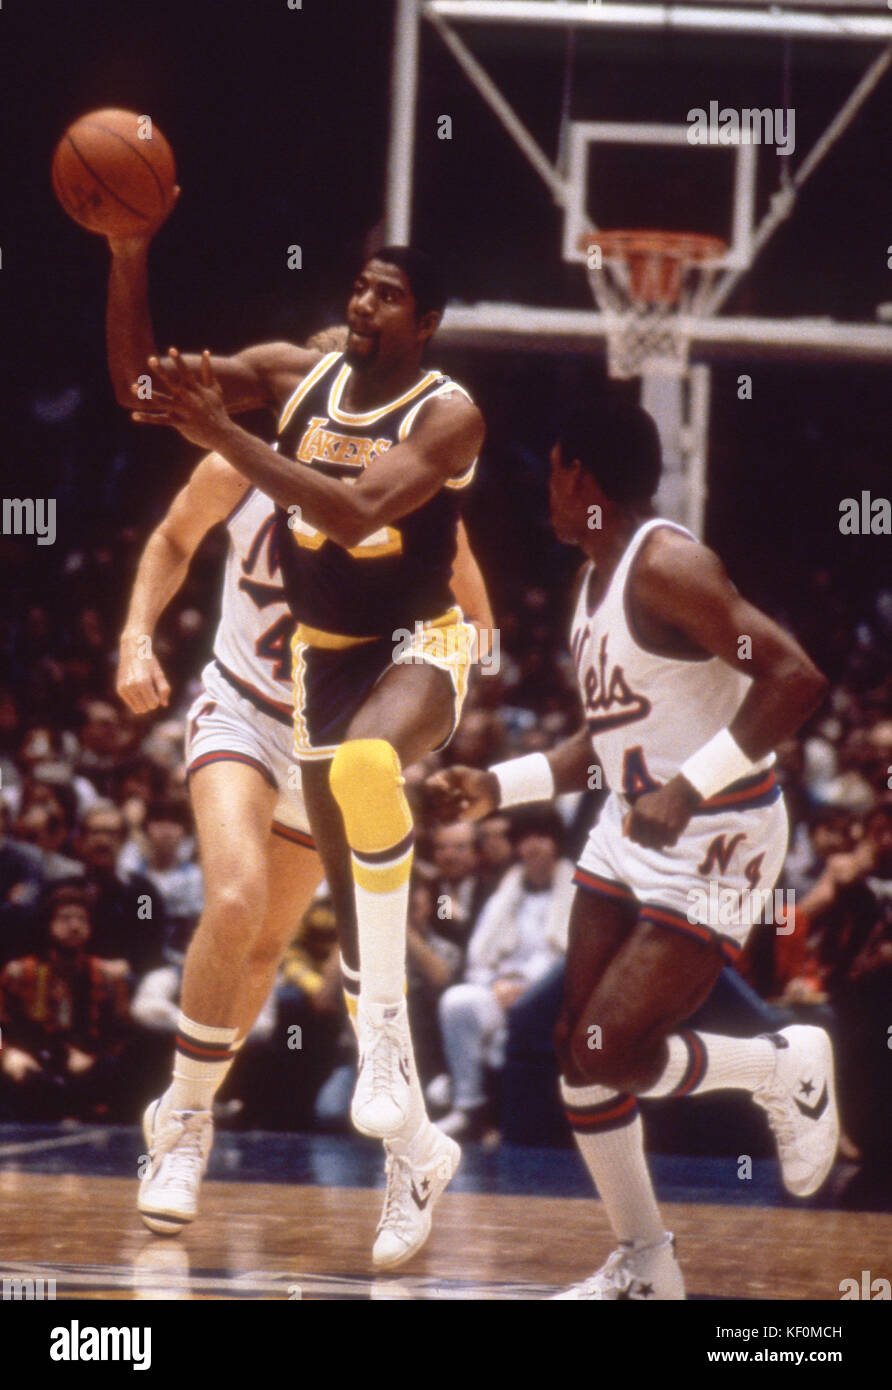 Magic Johnson of the Los Angeles Lakers bringing the ball up court during a game against the New Jersey Nets at the Brendan Byrne Arena in the Meadowl Stock Photo